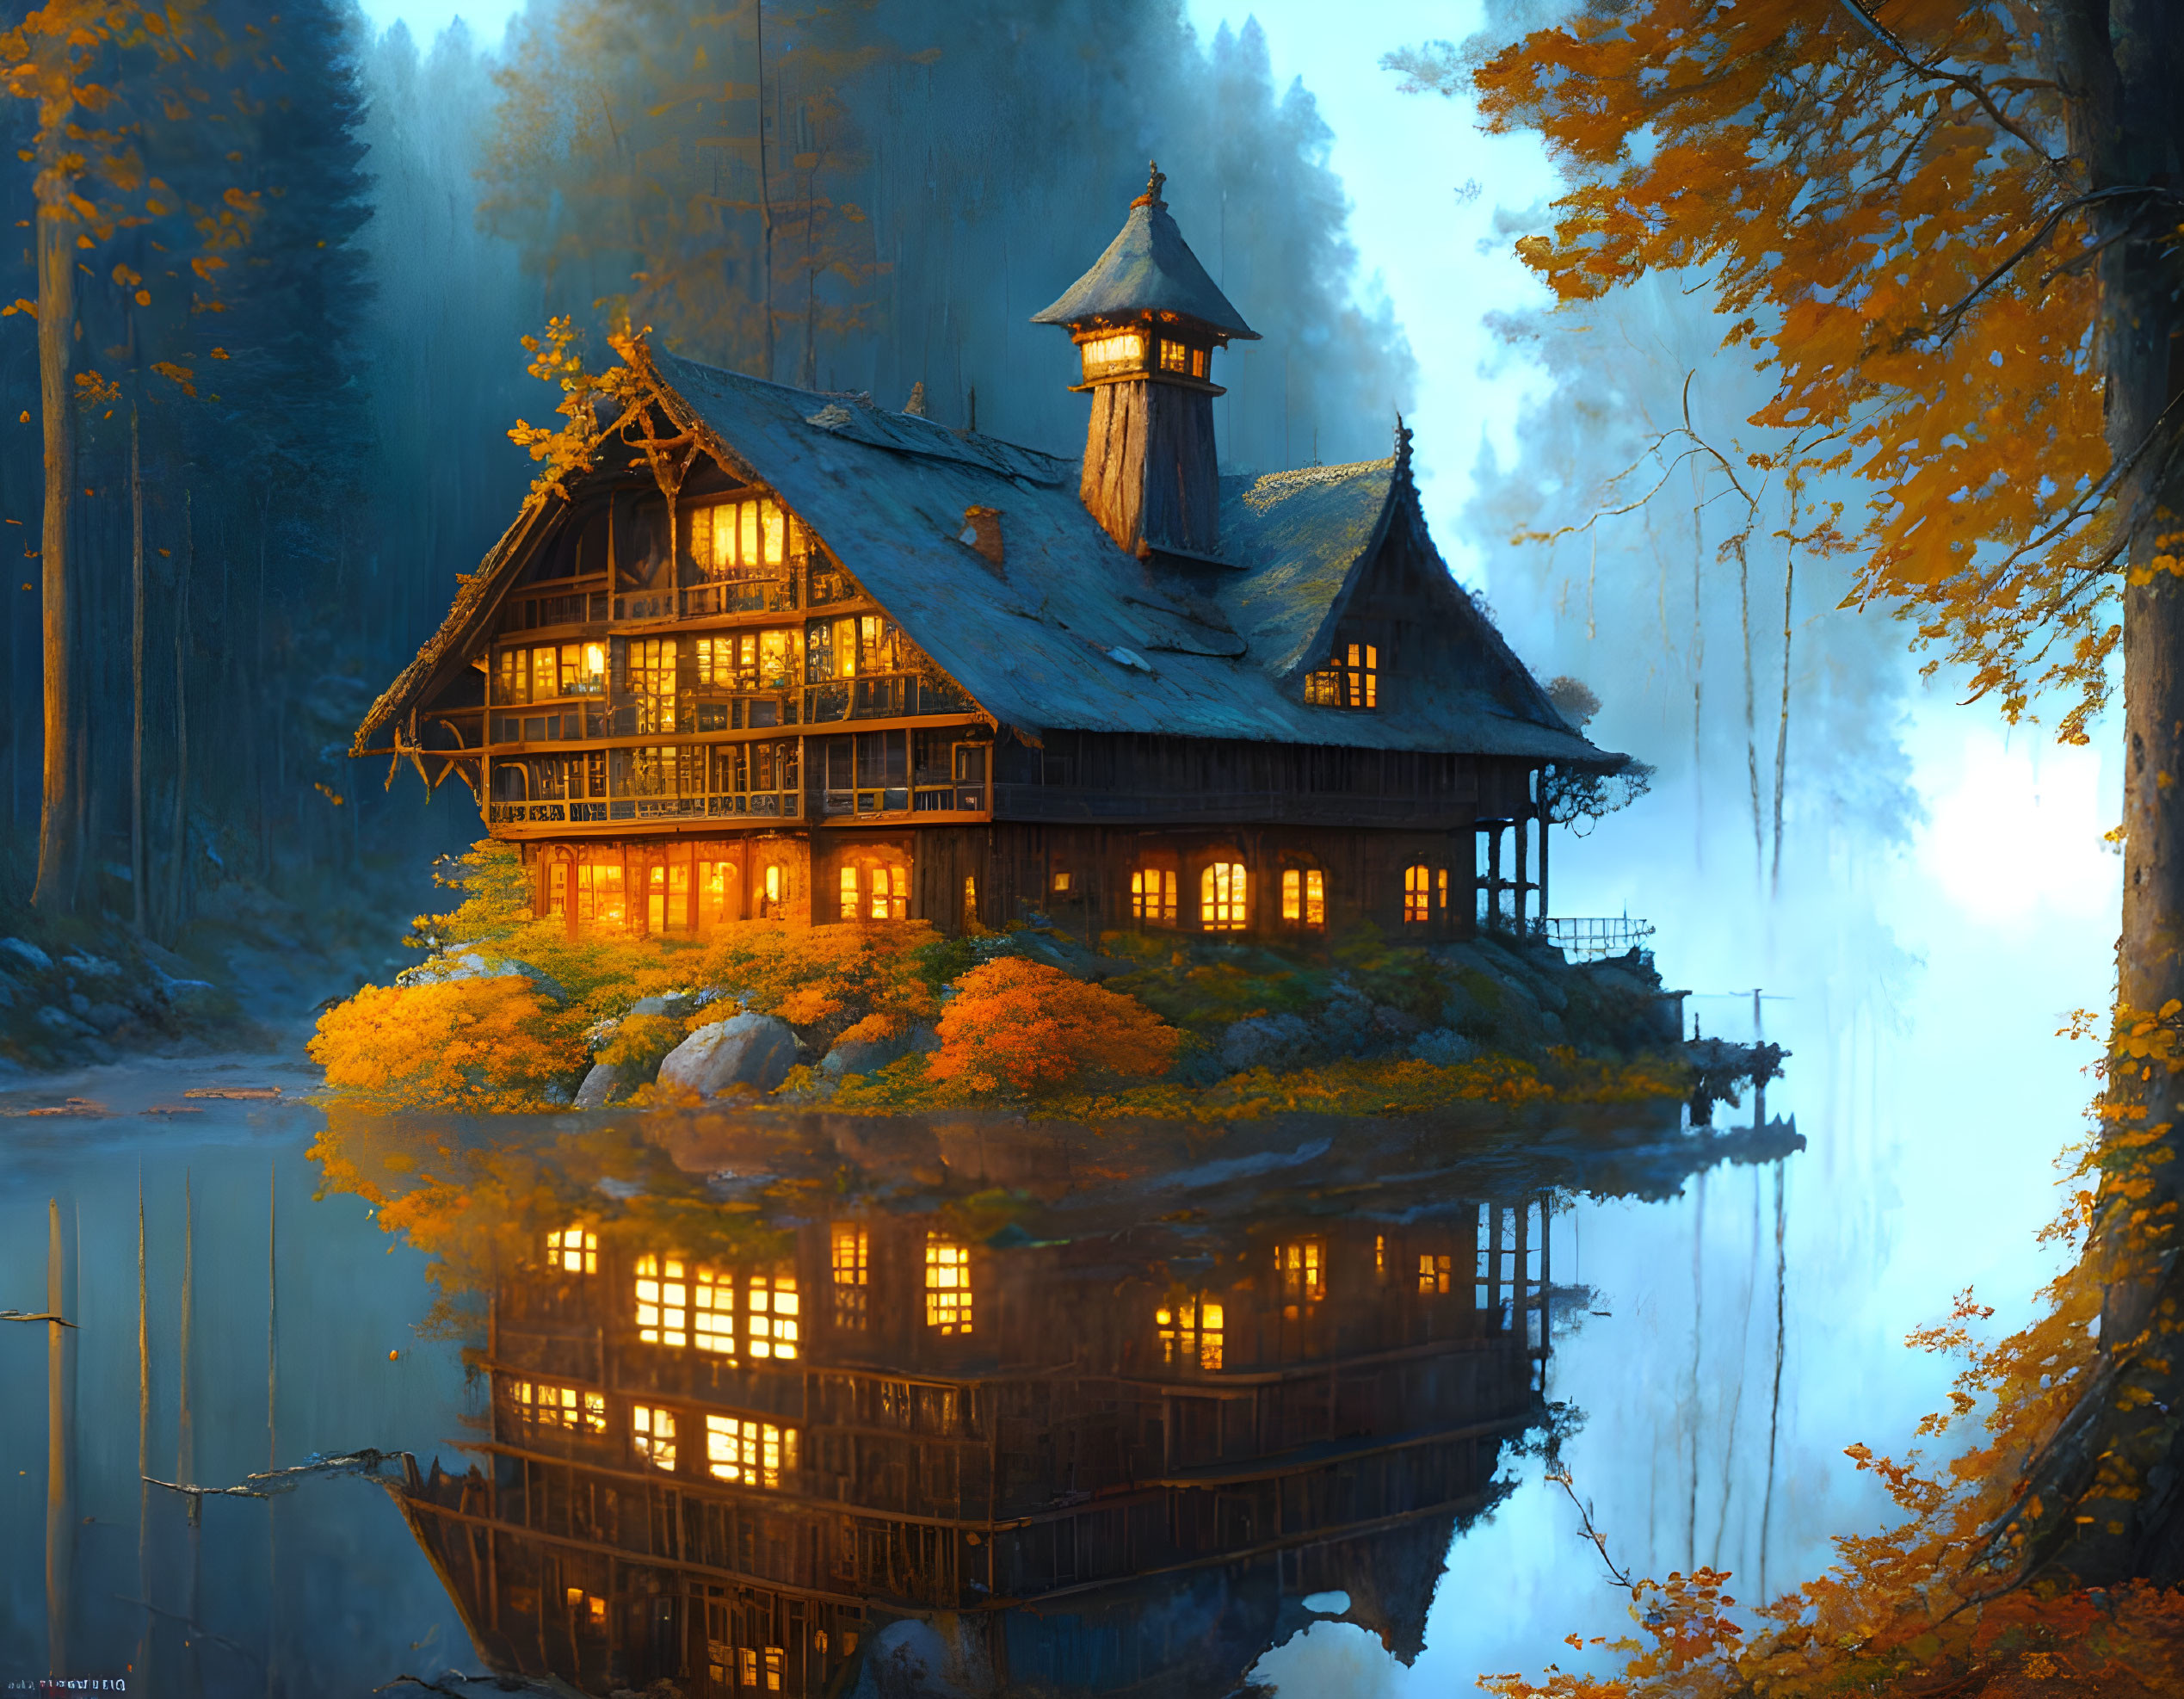 My country house on the lake